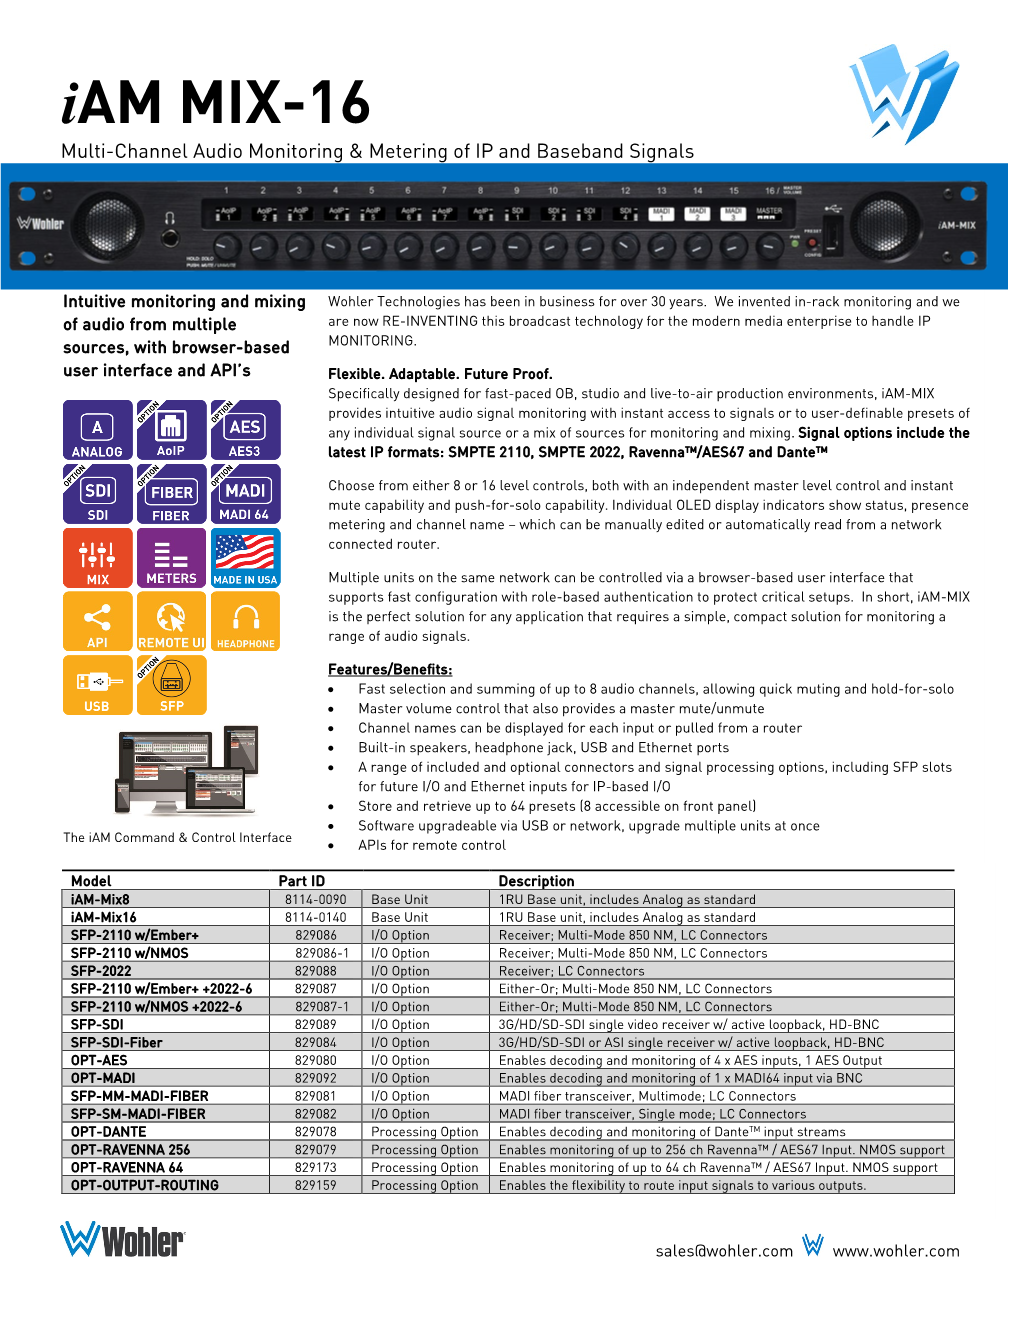 Iam MIX-16 Multi-Channel Audio Monitoring & Metering of IP and Baseband Signals